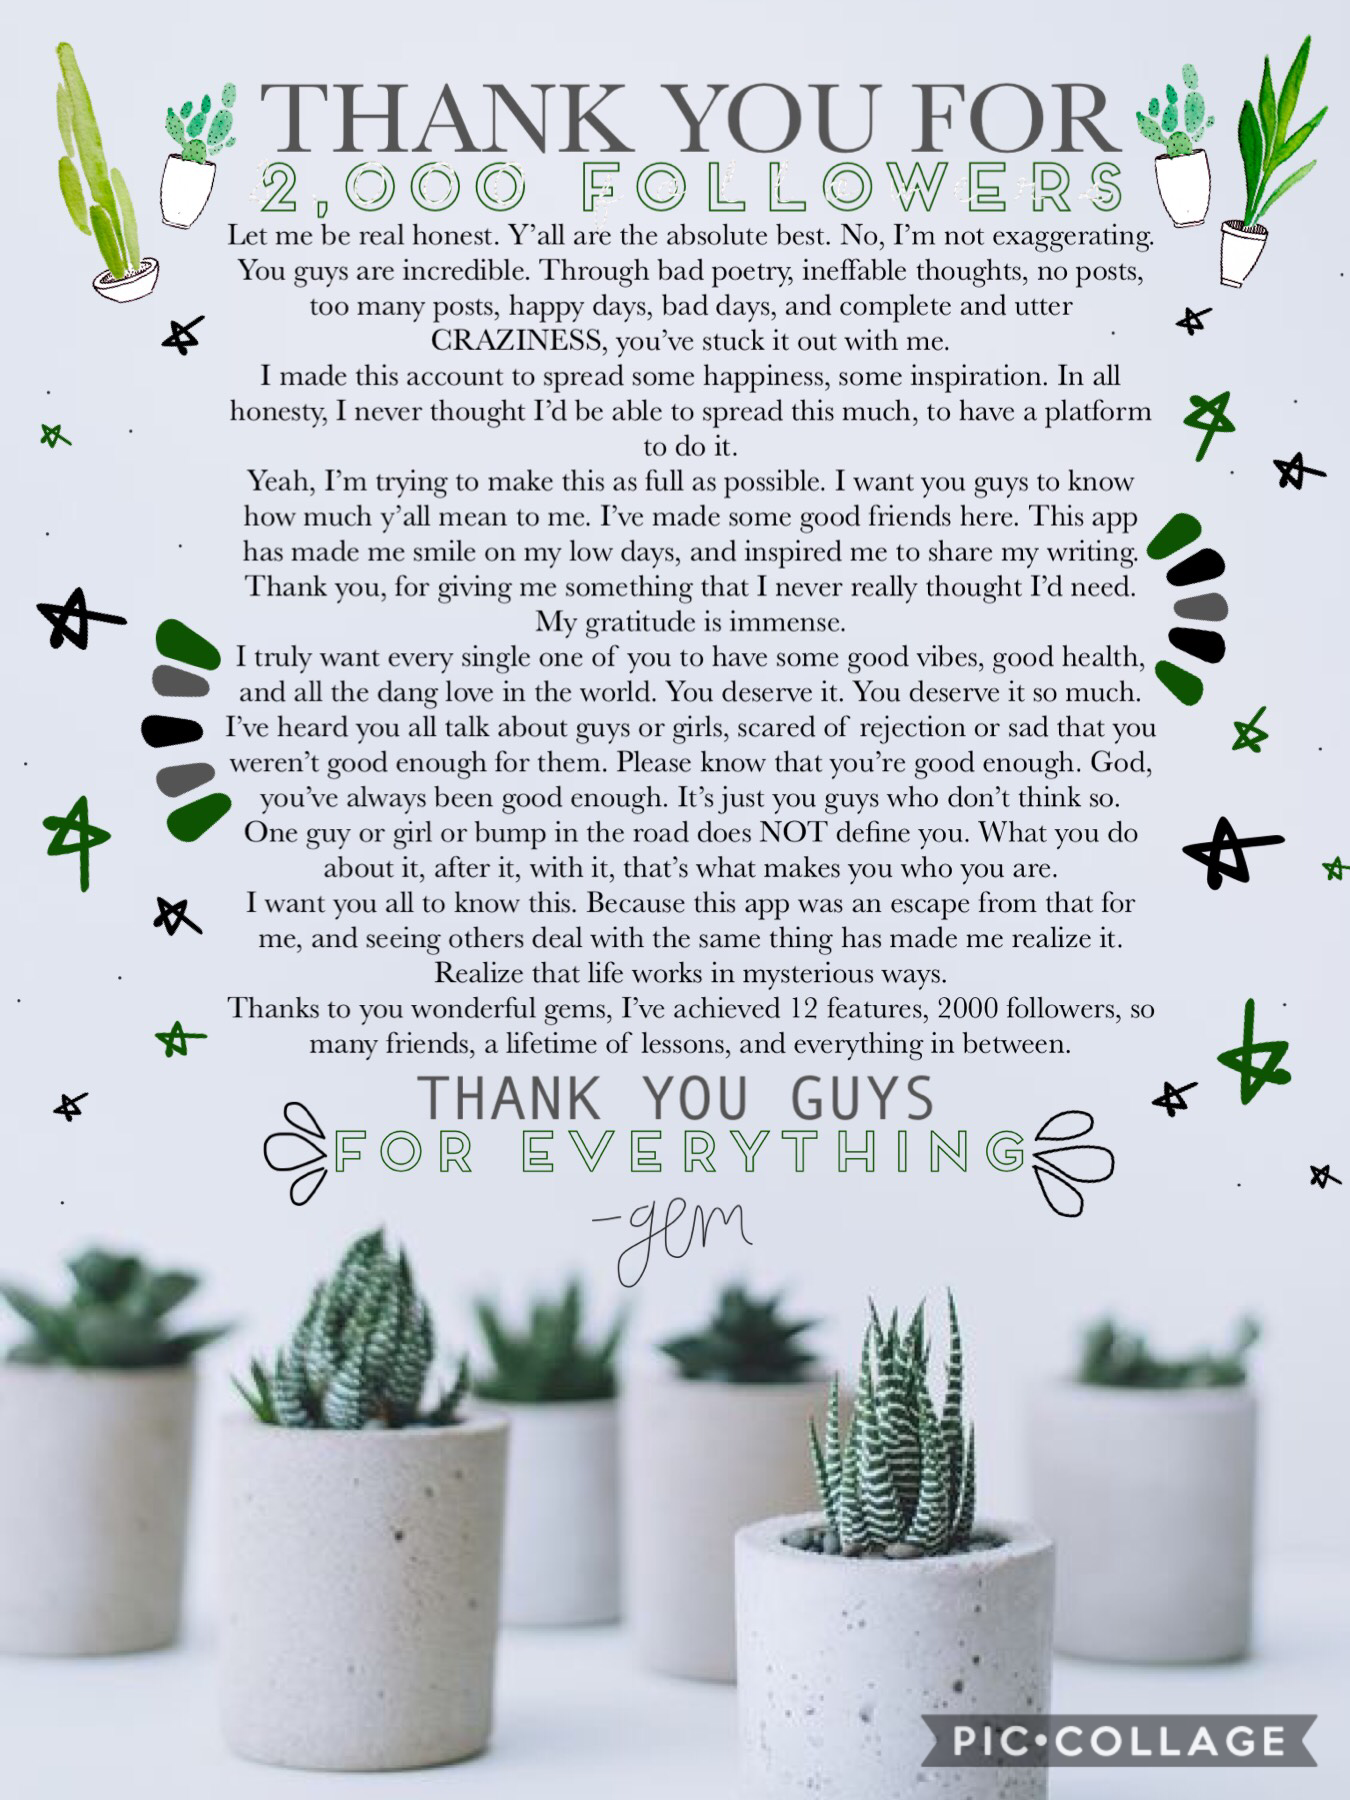 “🌵tap🌵”
Thank you gems so so so so much for 2k! I couldn’t be more grateful or humbled by the amount of support, love, and happiness i see from you all! Every day I love waking up to your guys’ comments. They make my day! And so do u guys. So I send all m